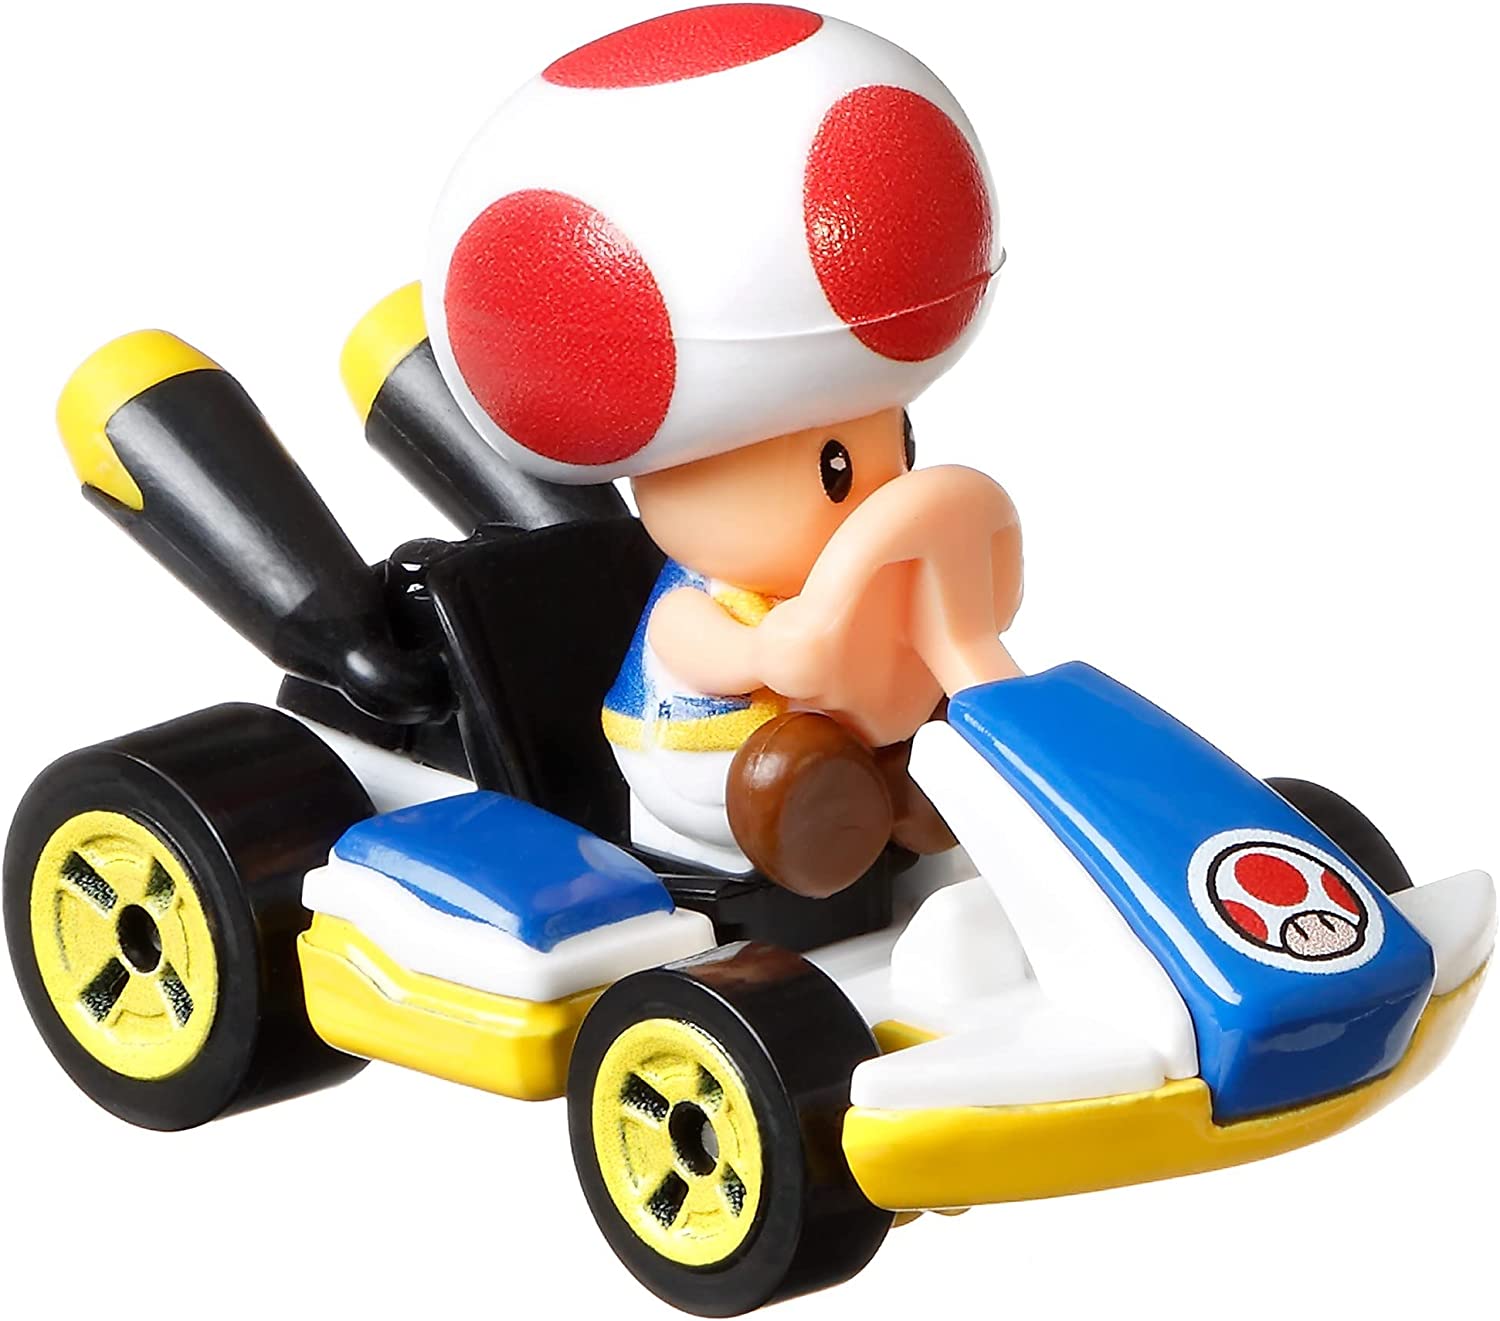 Hot Wheels Mario Kart Vehicle 4-Pack, Features  Set 4 1:64 scale die-cast vehicles - for Ages 3 Years Old & Up